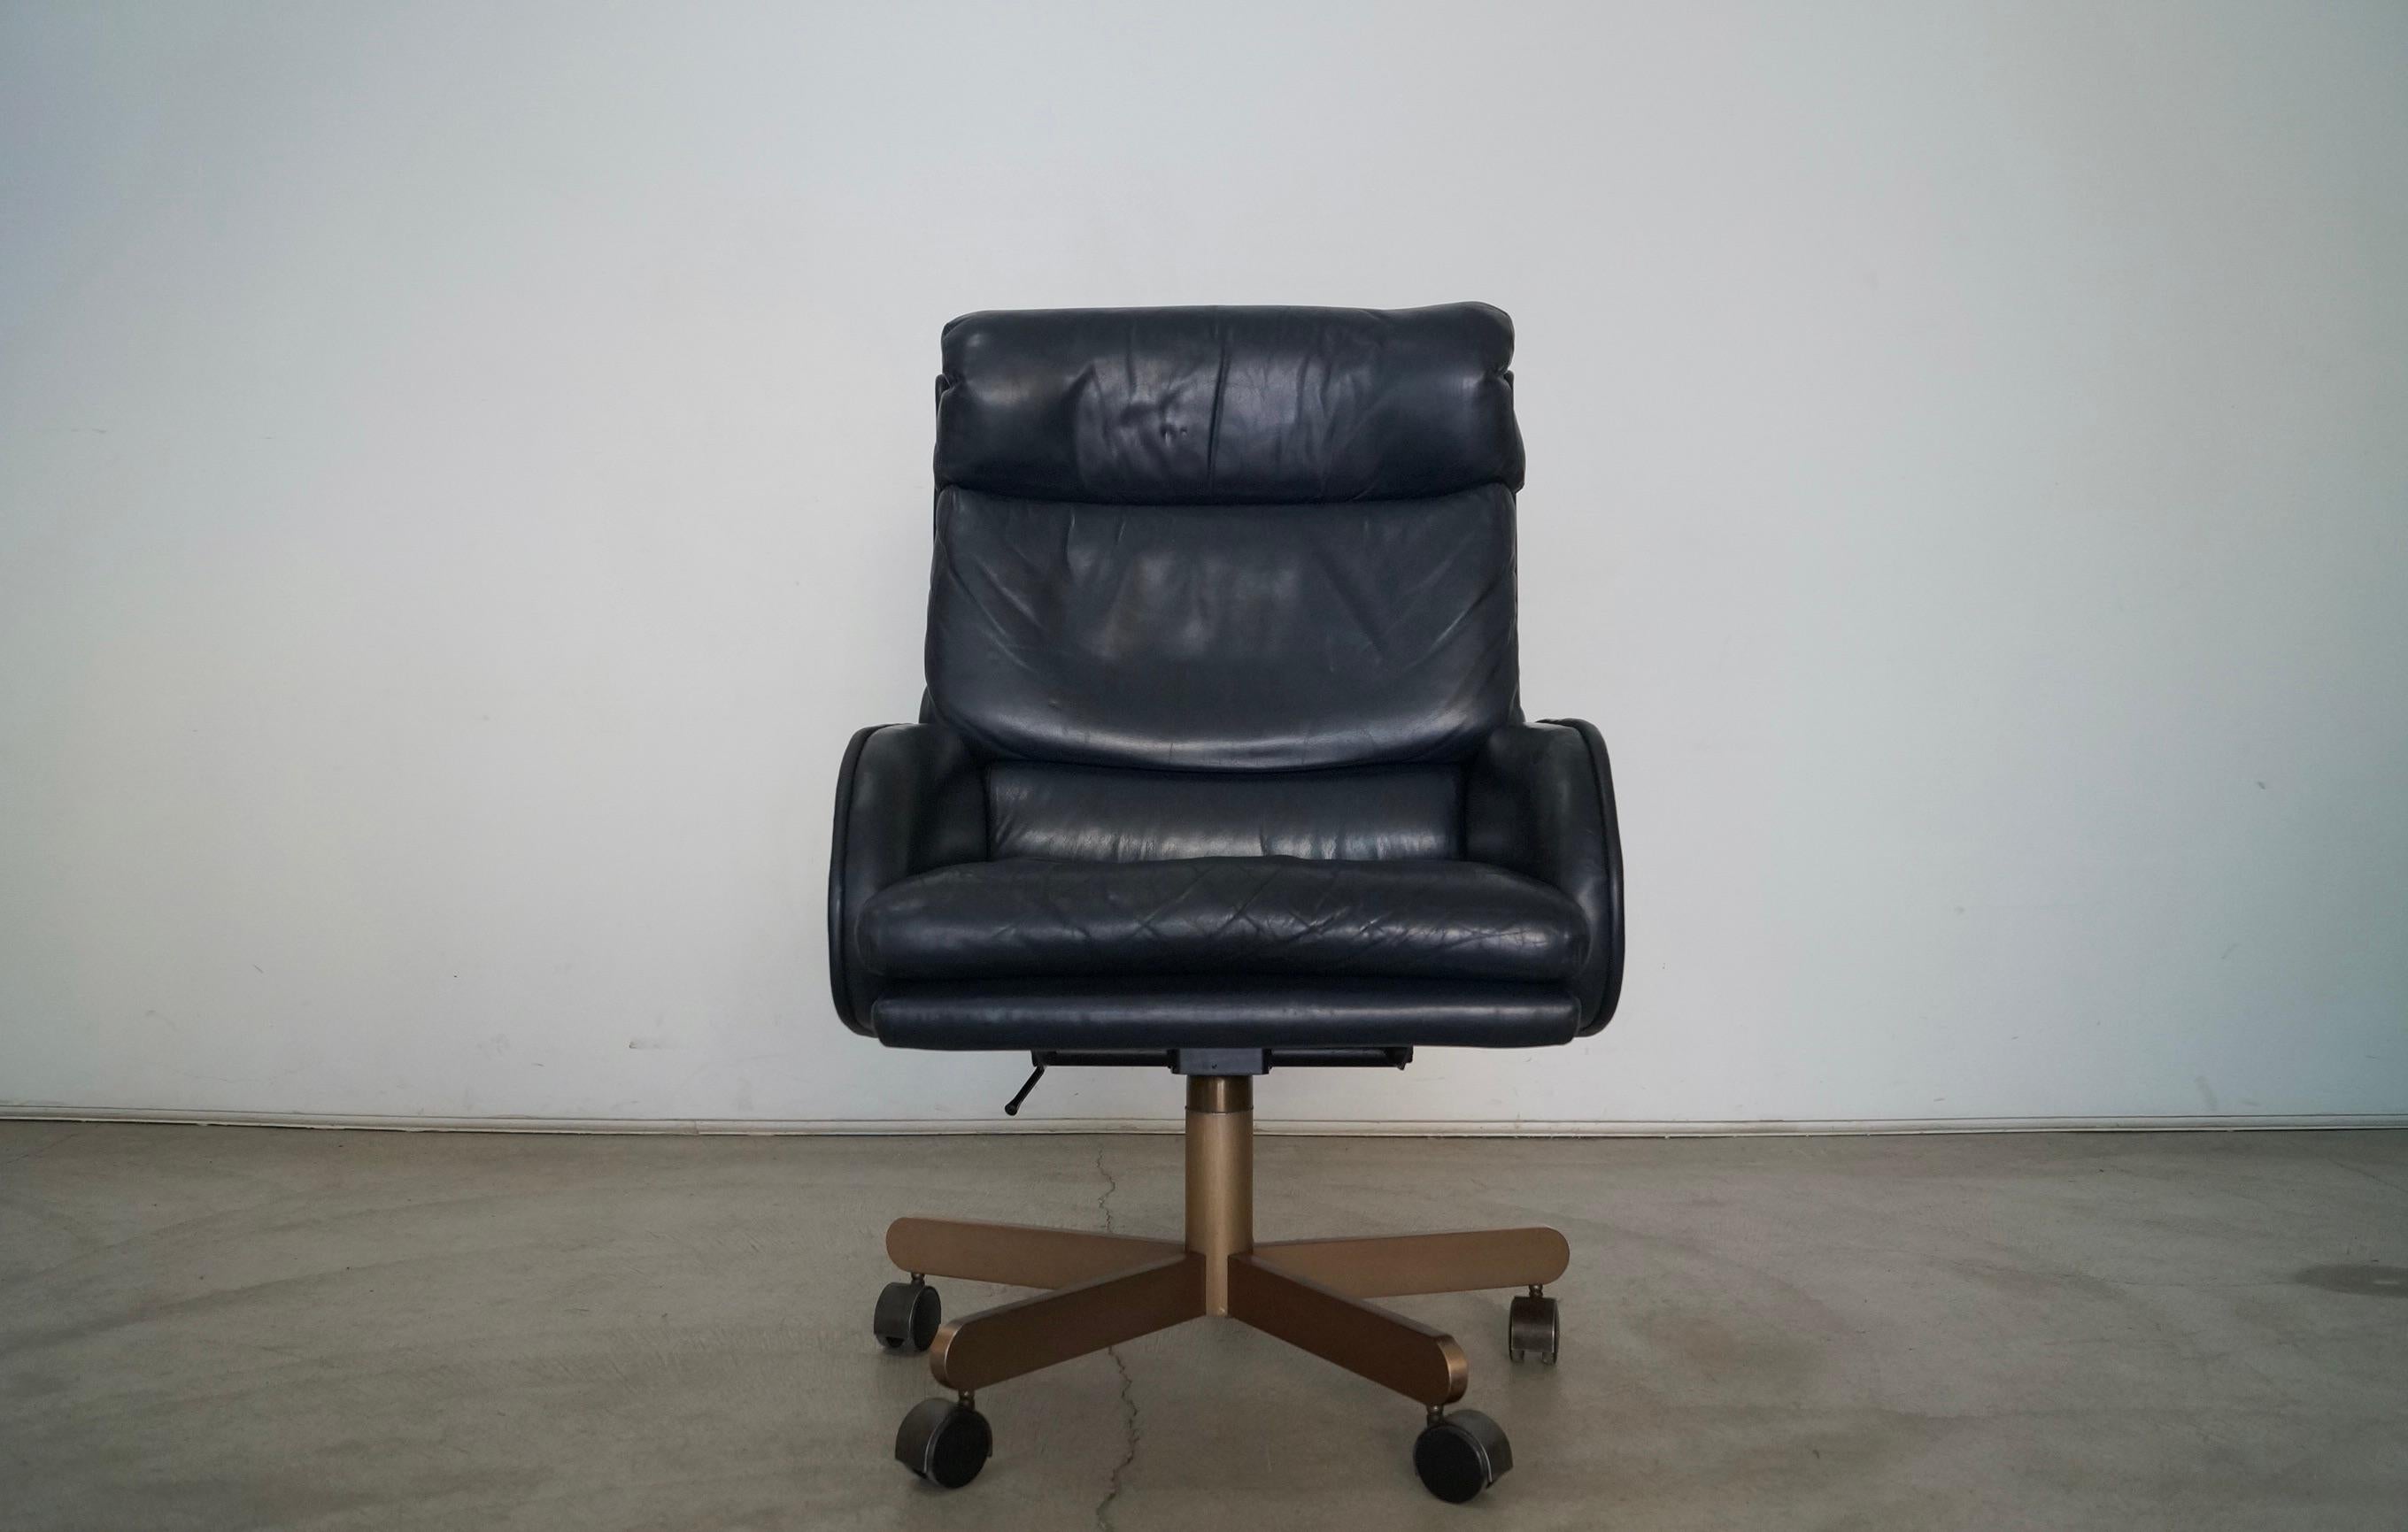 Vintage original Dunbar executive office desk chair for sale. Designed by Roger Sprunger in the 1970's, and manufactured by Dunbar. Has the original seal and label underneath. It has the original dark navy blue leather in great vintage condition.